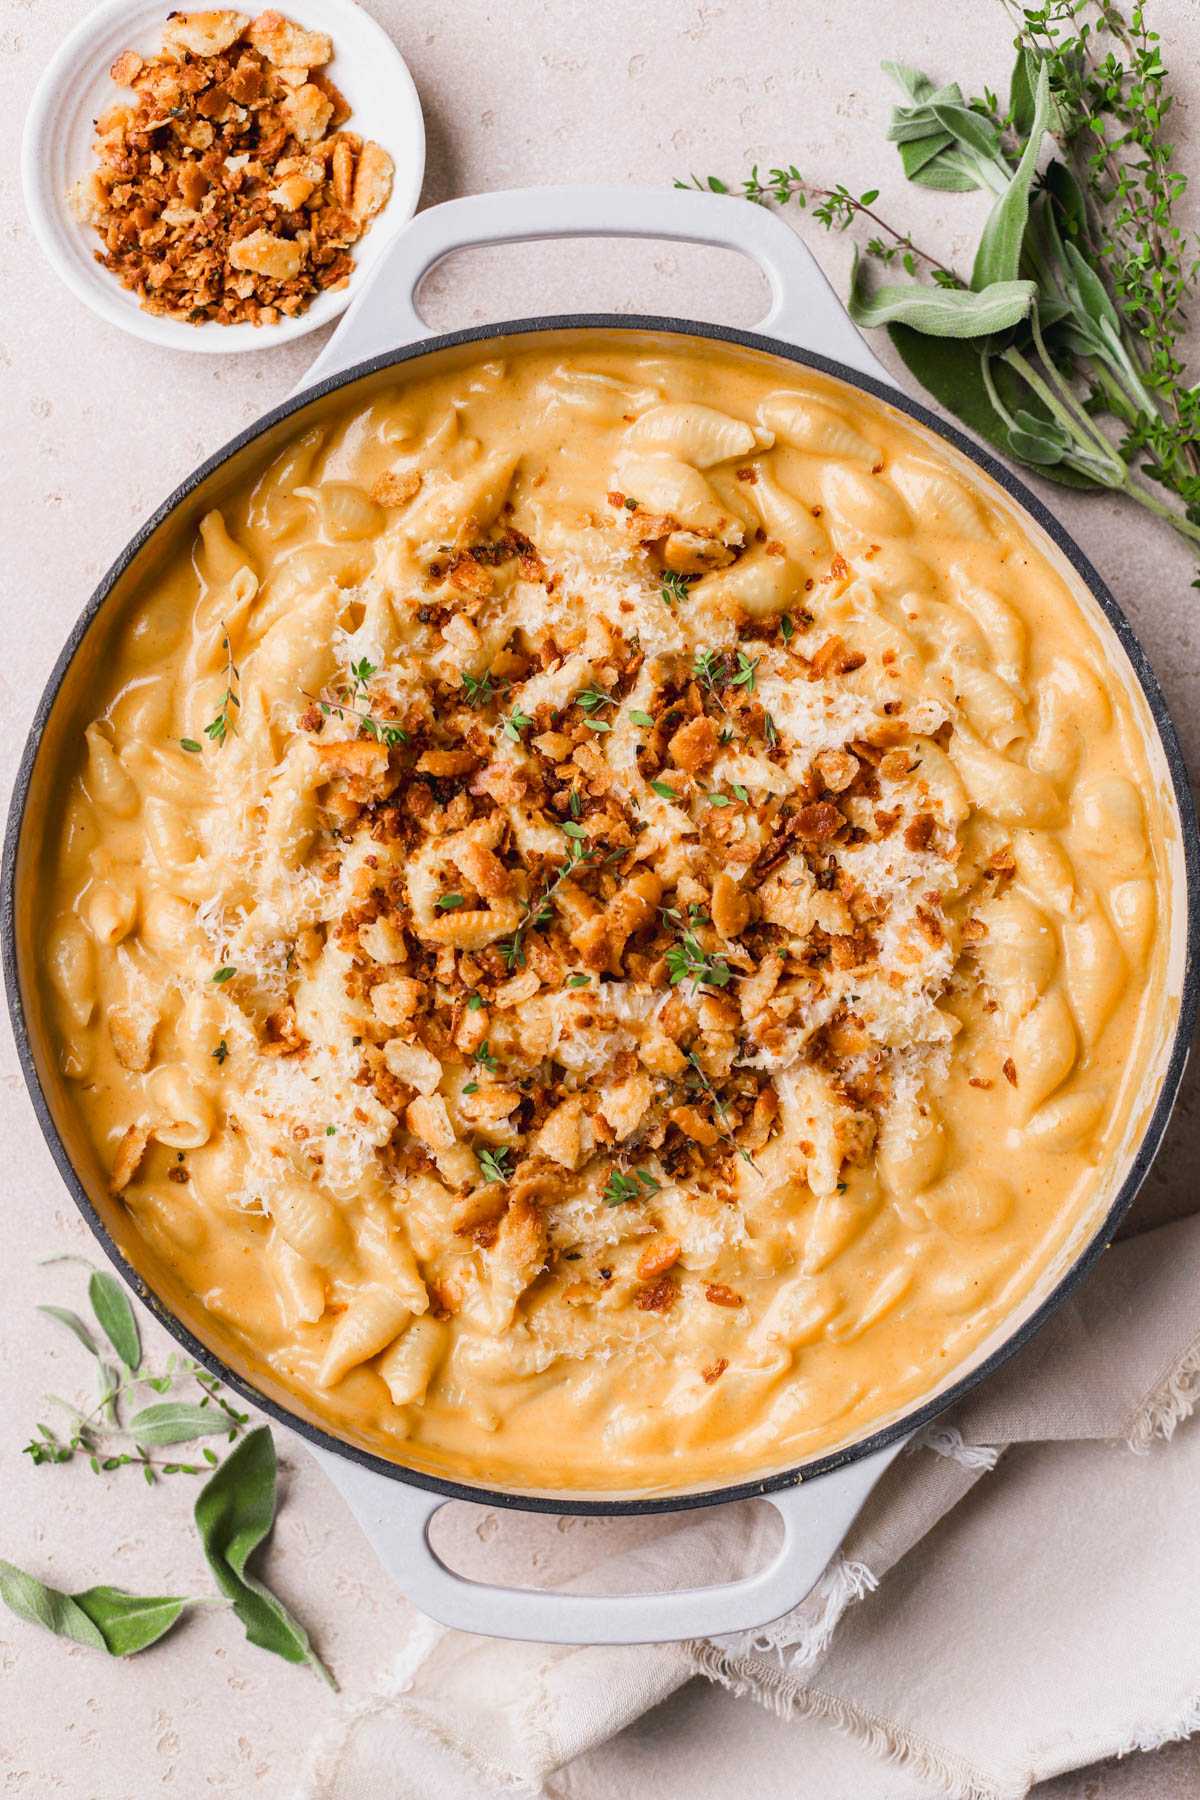 Dutch oven Mac and cheese with roasted butternut squash, four cheeses and cracker crust.  